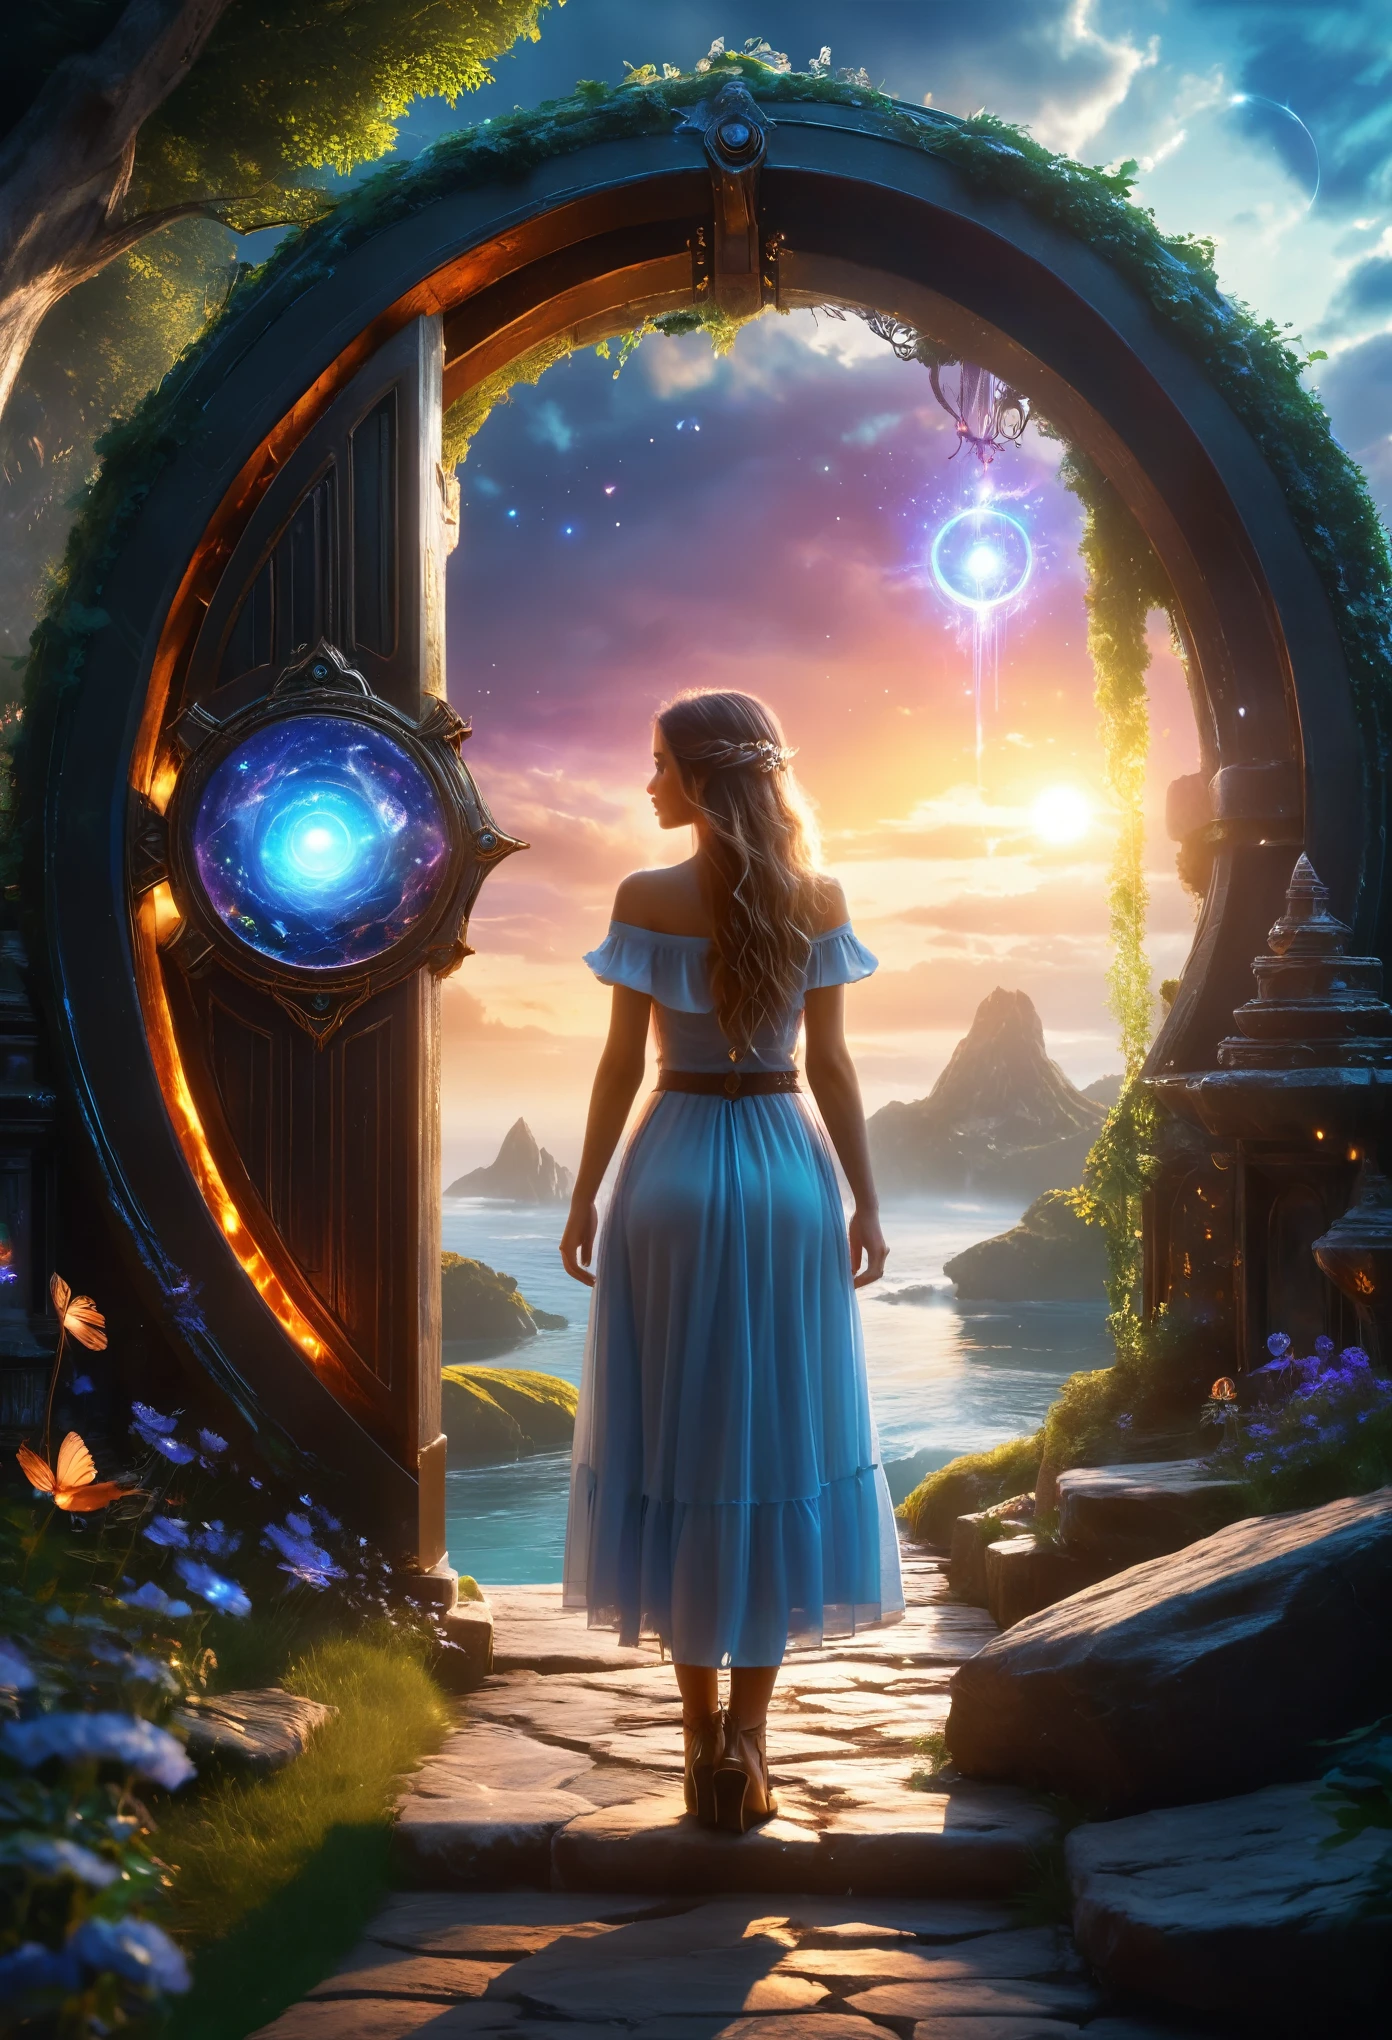 ，Beautiful girl, Fantasy world with magic portal, Everything is magical, The atmosphere is magical, Photo Real, Attention to detail, Highest quality, 4K